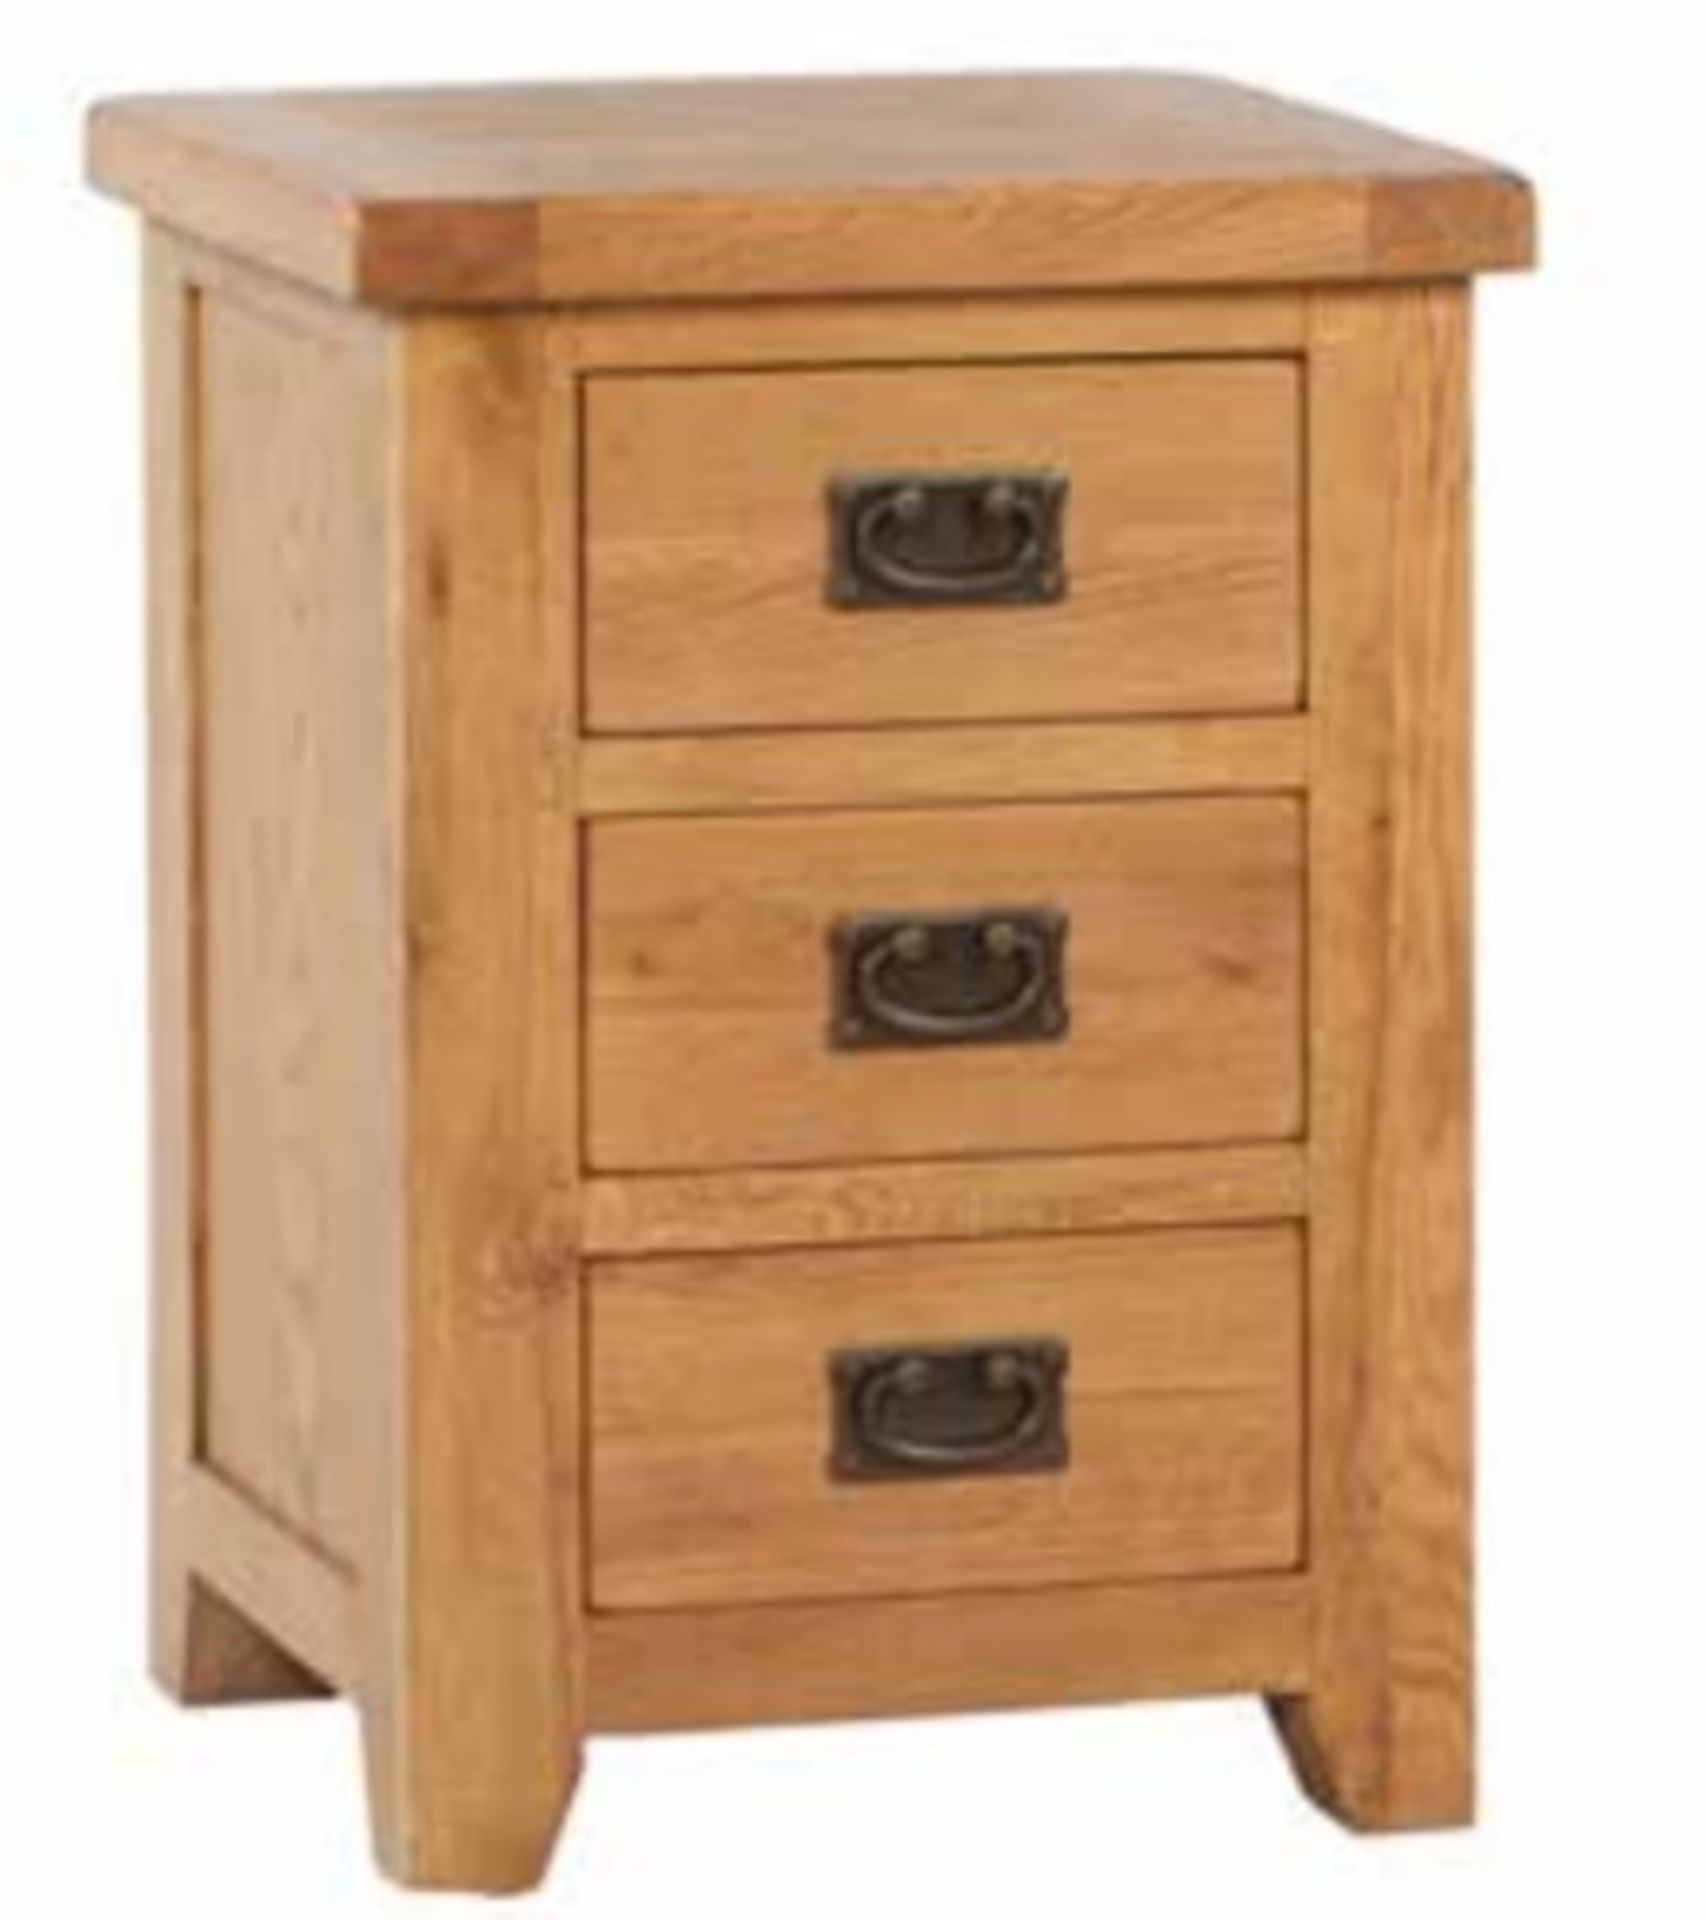 V Brand New Chiswick Oak Bedside with 3 Drawers 47w x 40d x 65h cms ISP £129.00 (furnituredirectory)